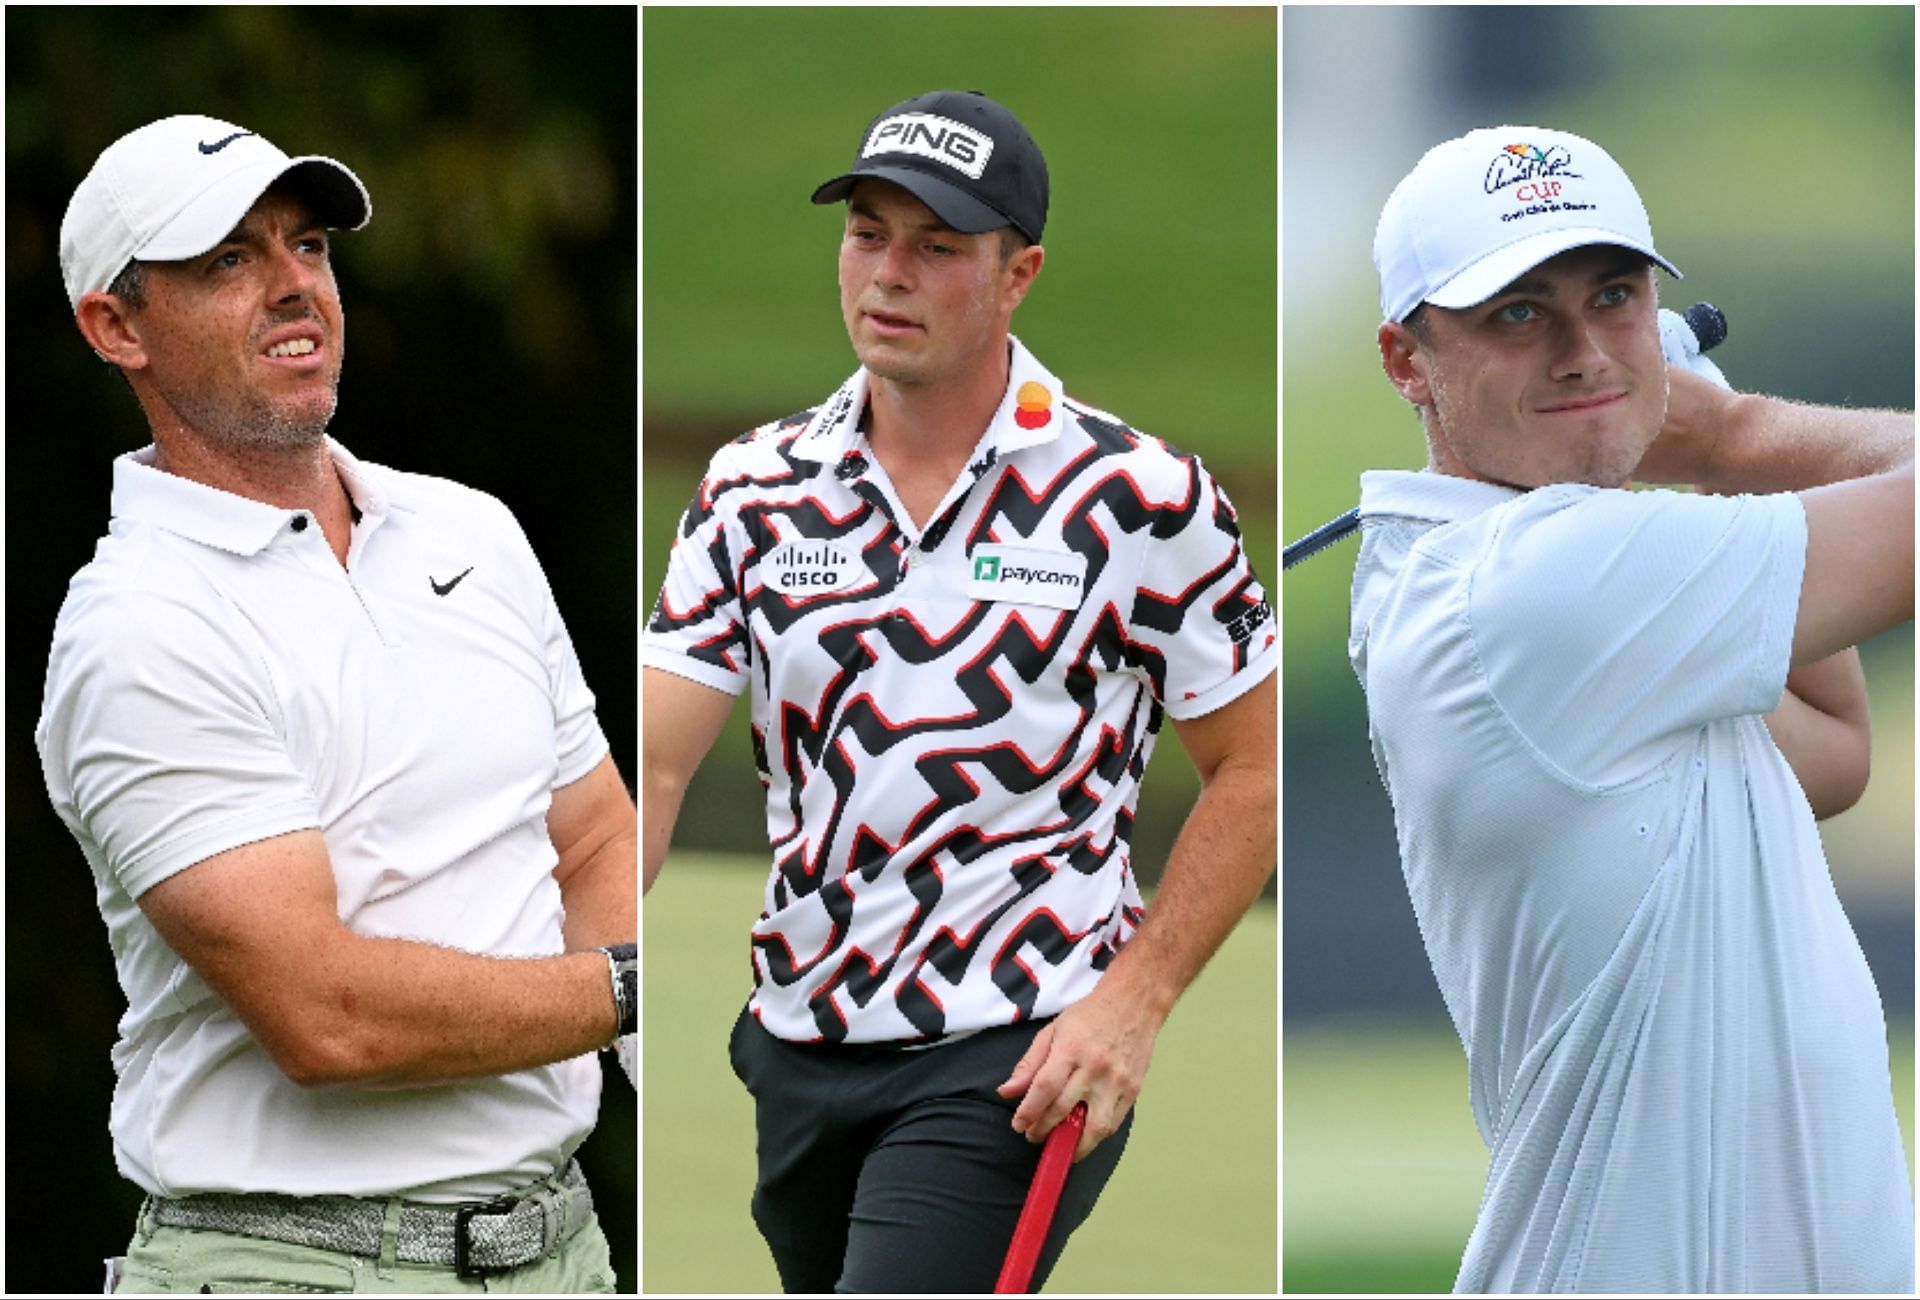 Rory McIlory, Viktor Hovland, and Ludvig Aberg are in the field of 2023 BMW PGA Championship 2023 (via Getty Images)